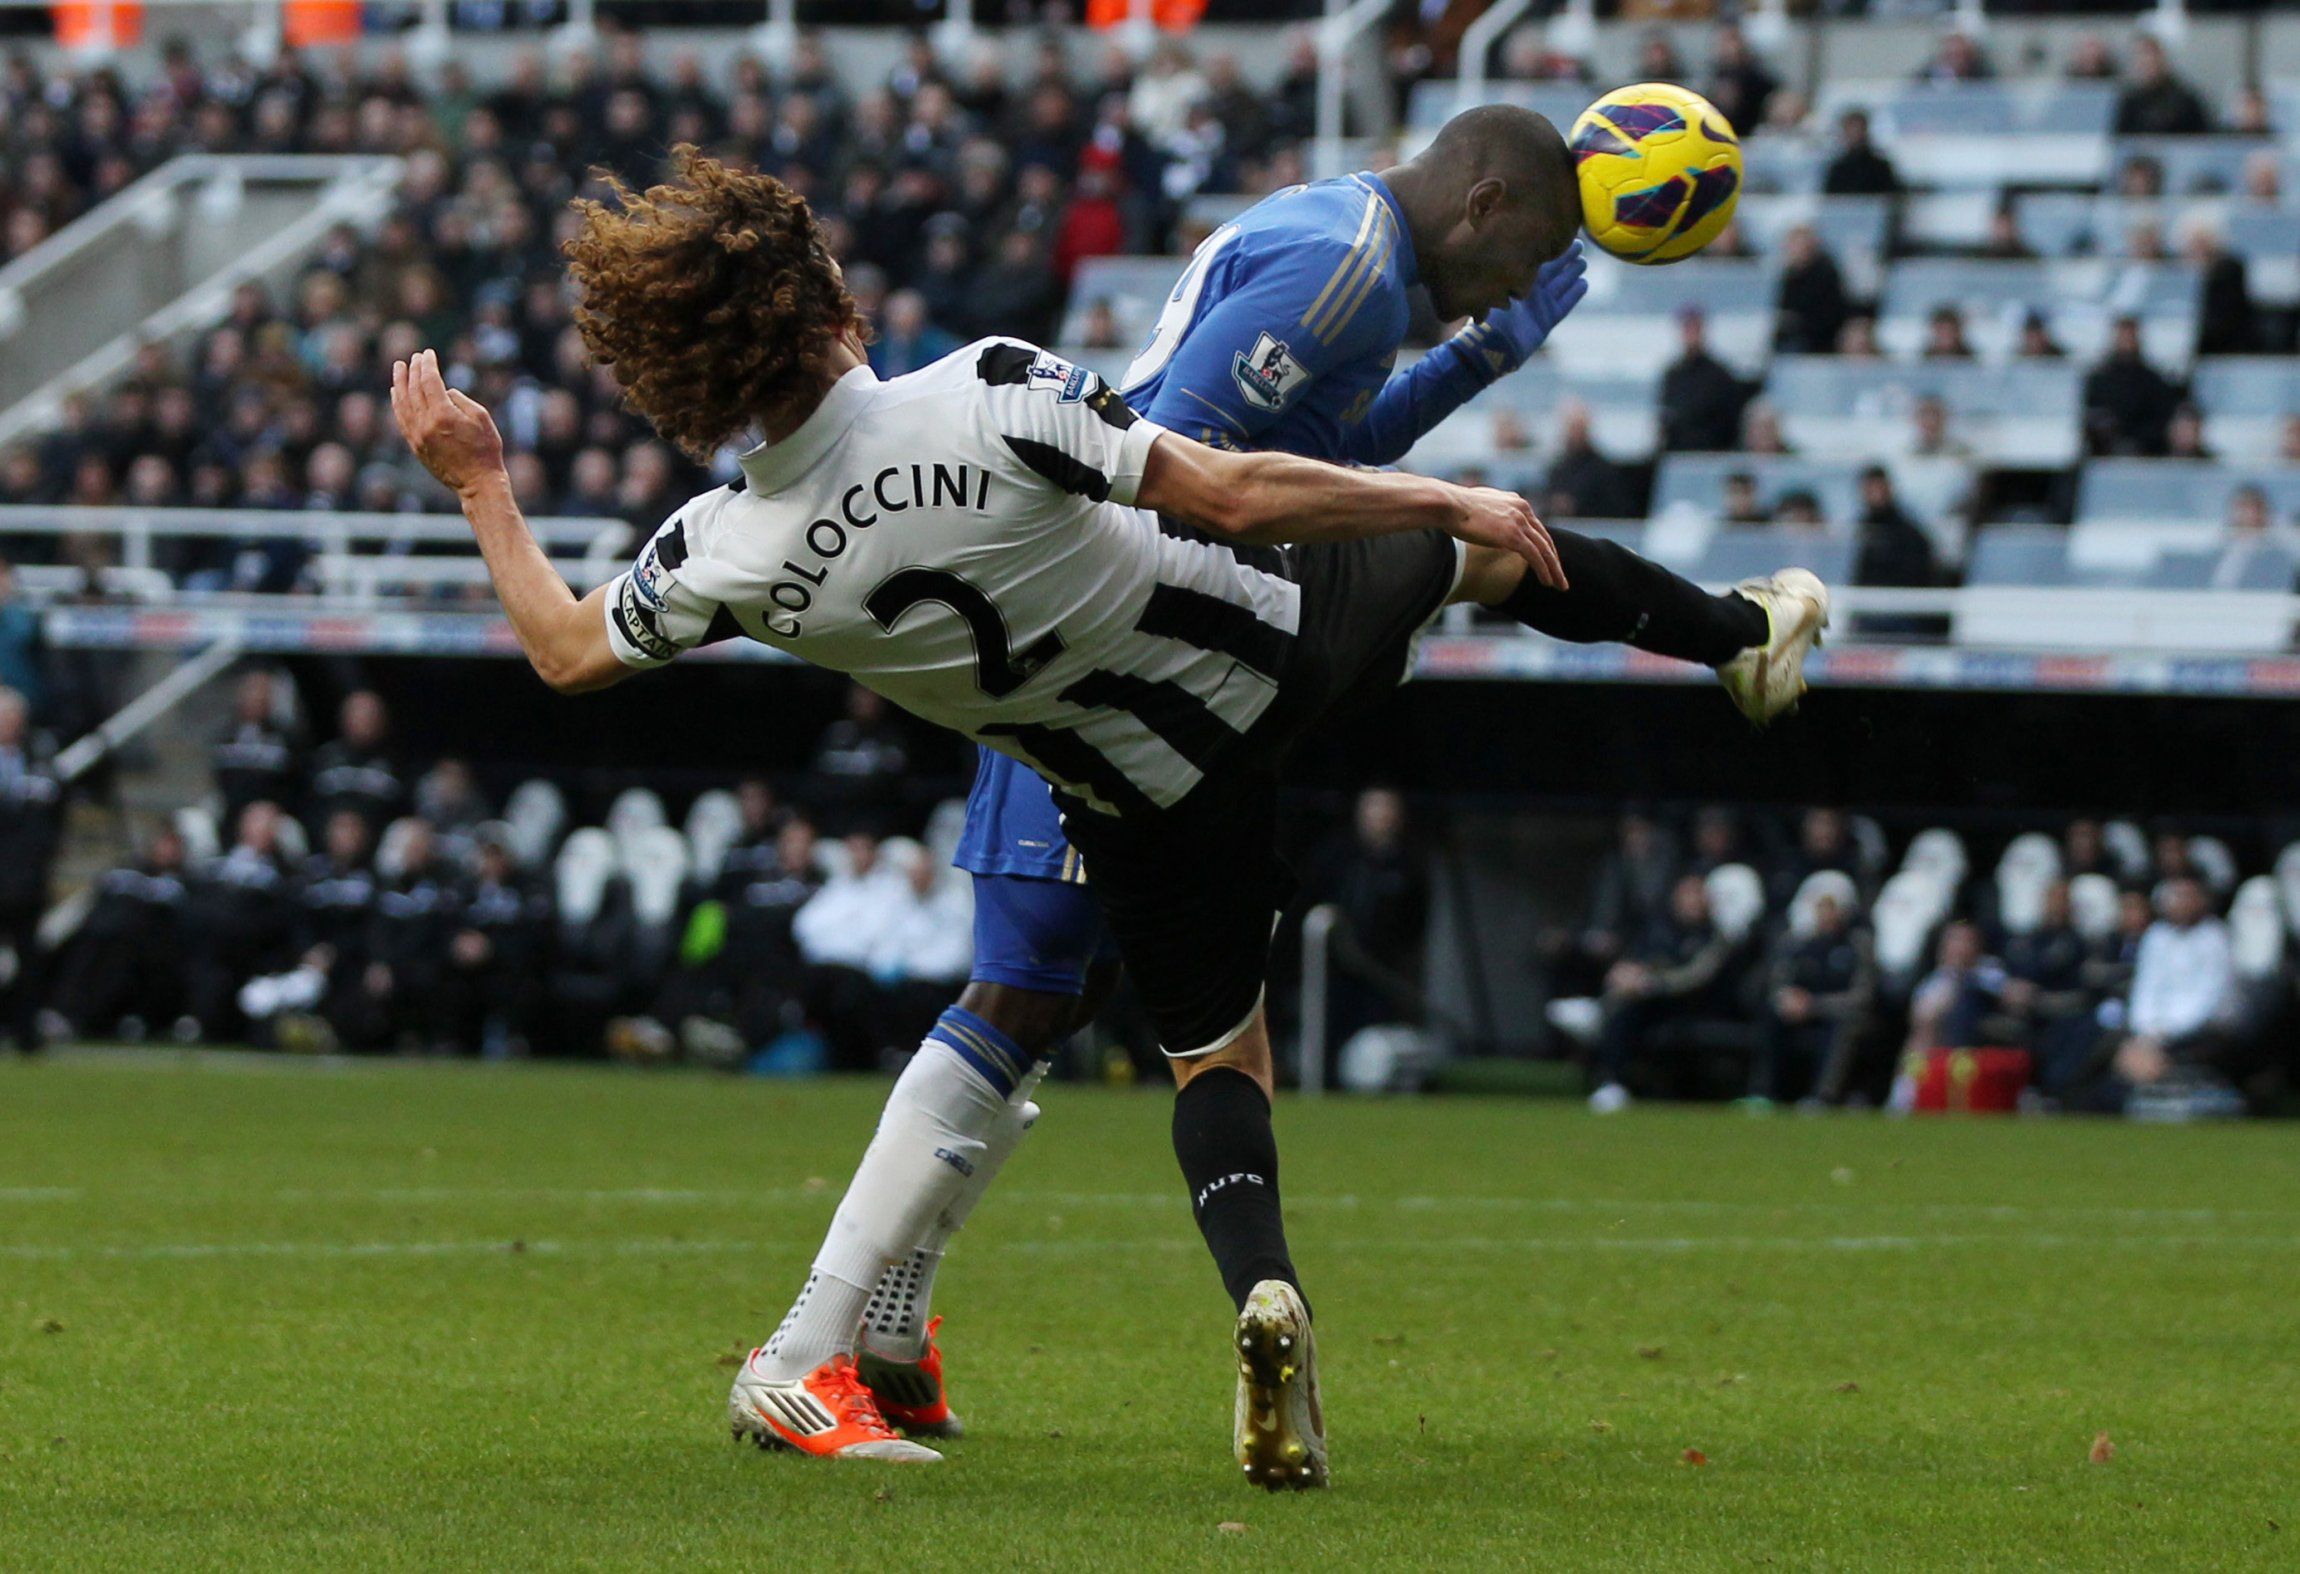 Demba Ba is kicked in the face by Fabricio Coloccini